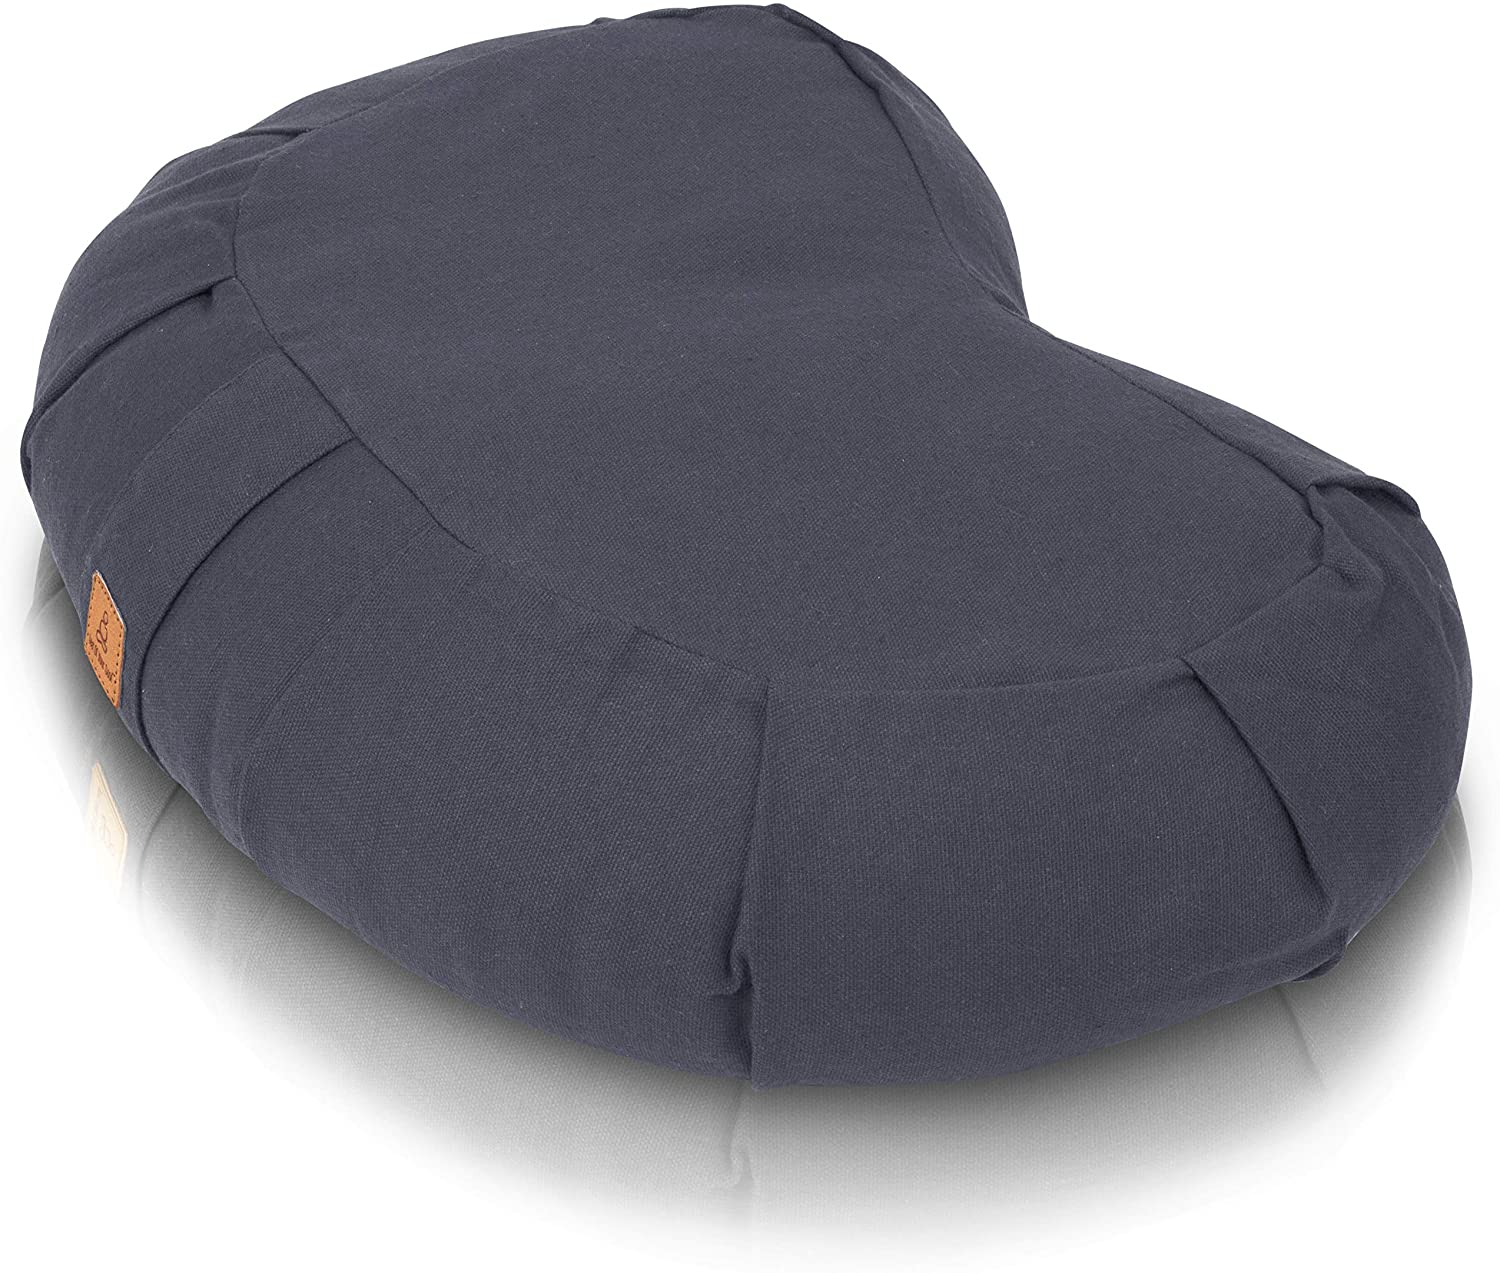 Seat Of Your Soul Adjustable Height & Firmness Meditation Cushion